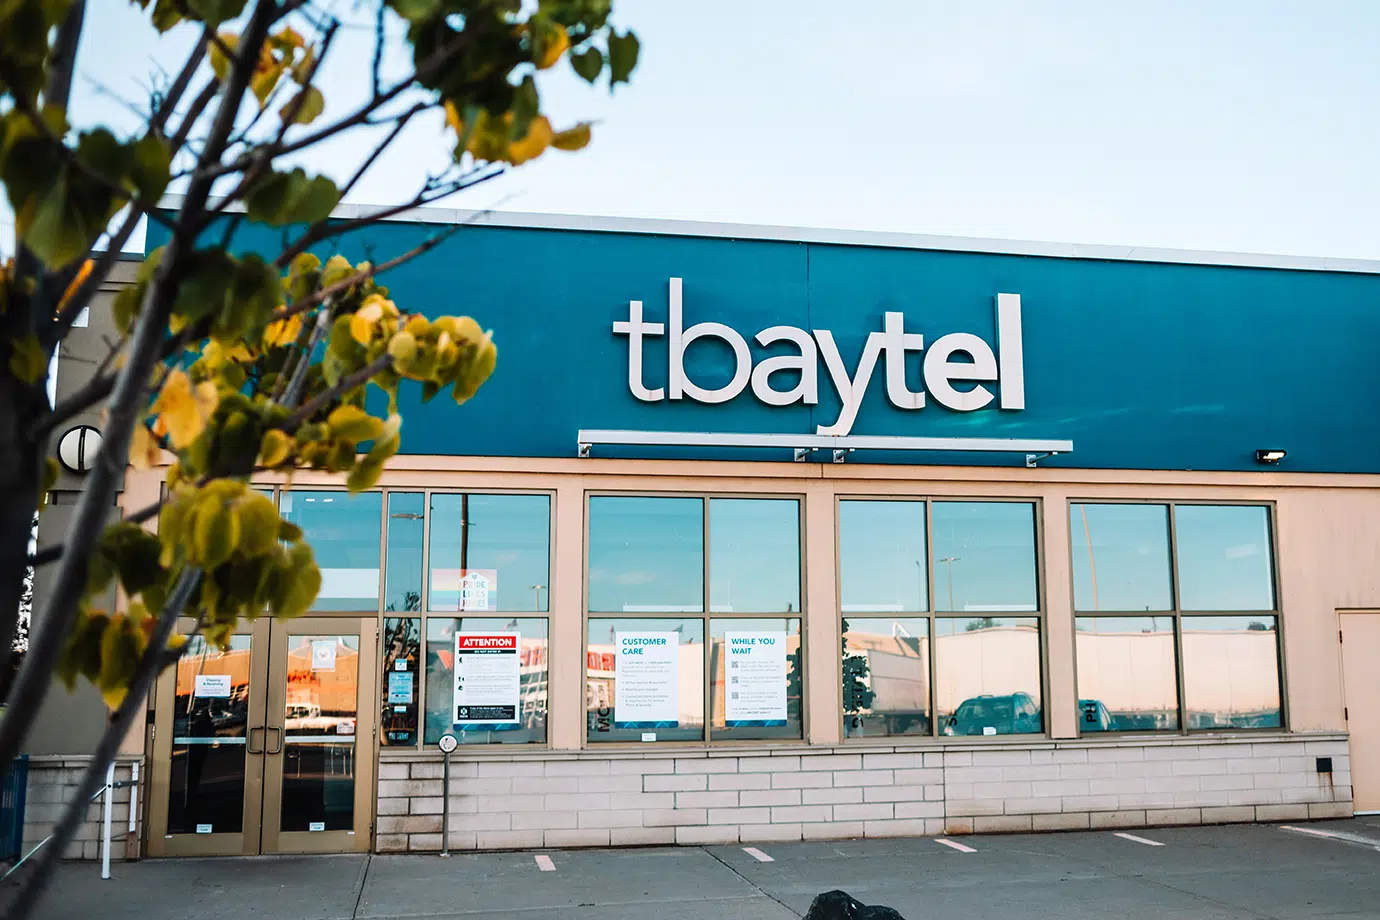 Thunder Bay's 2023 Tbaytel dividend comes in at $18 million